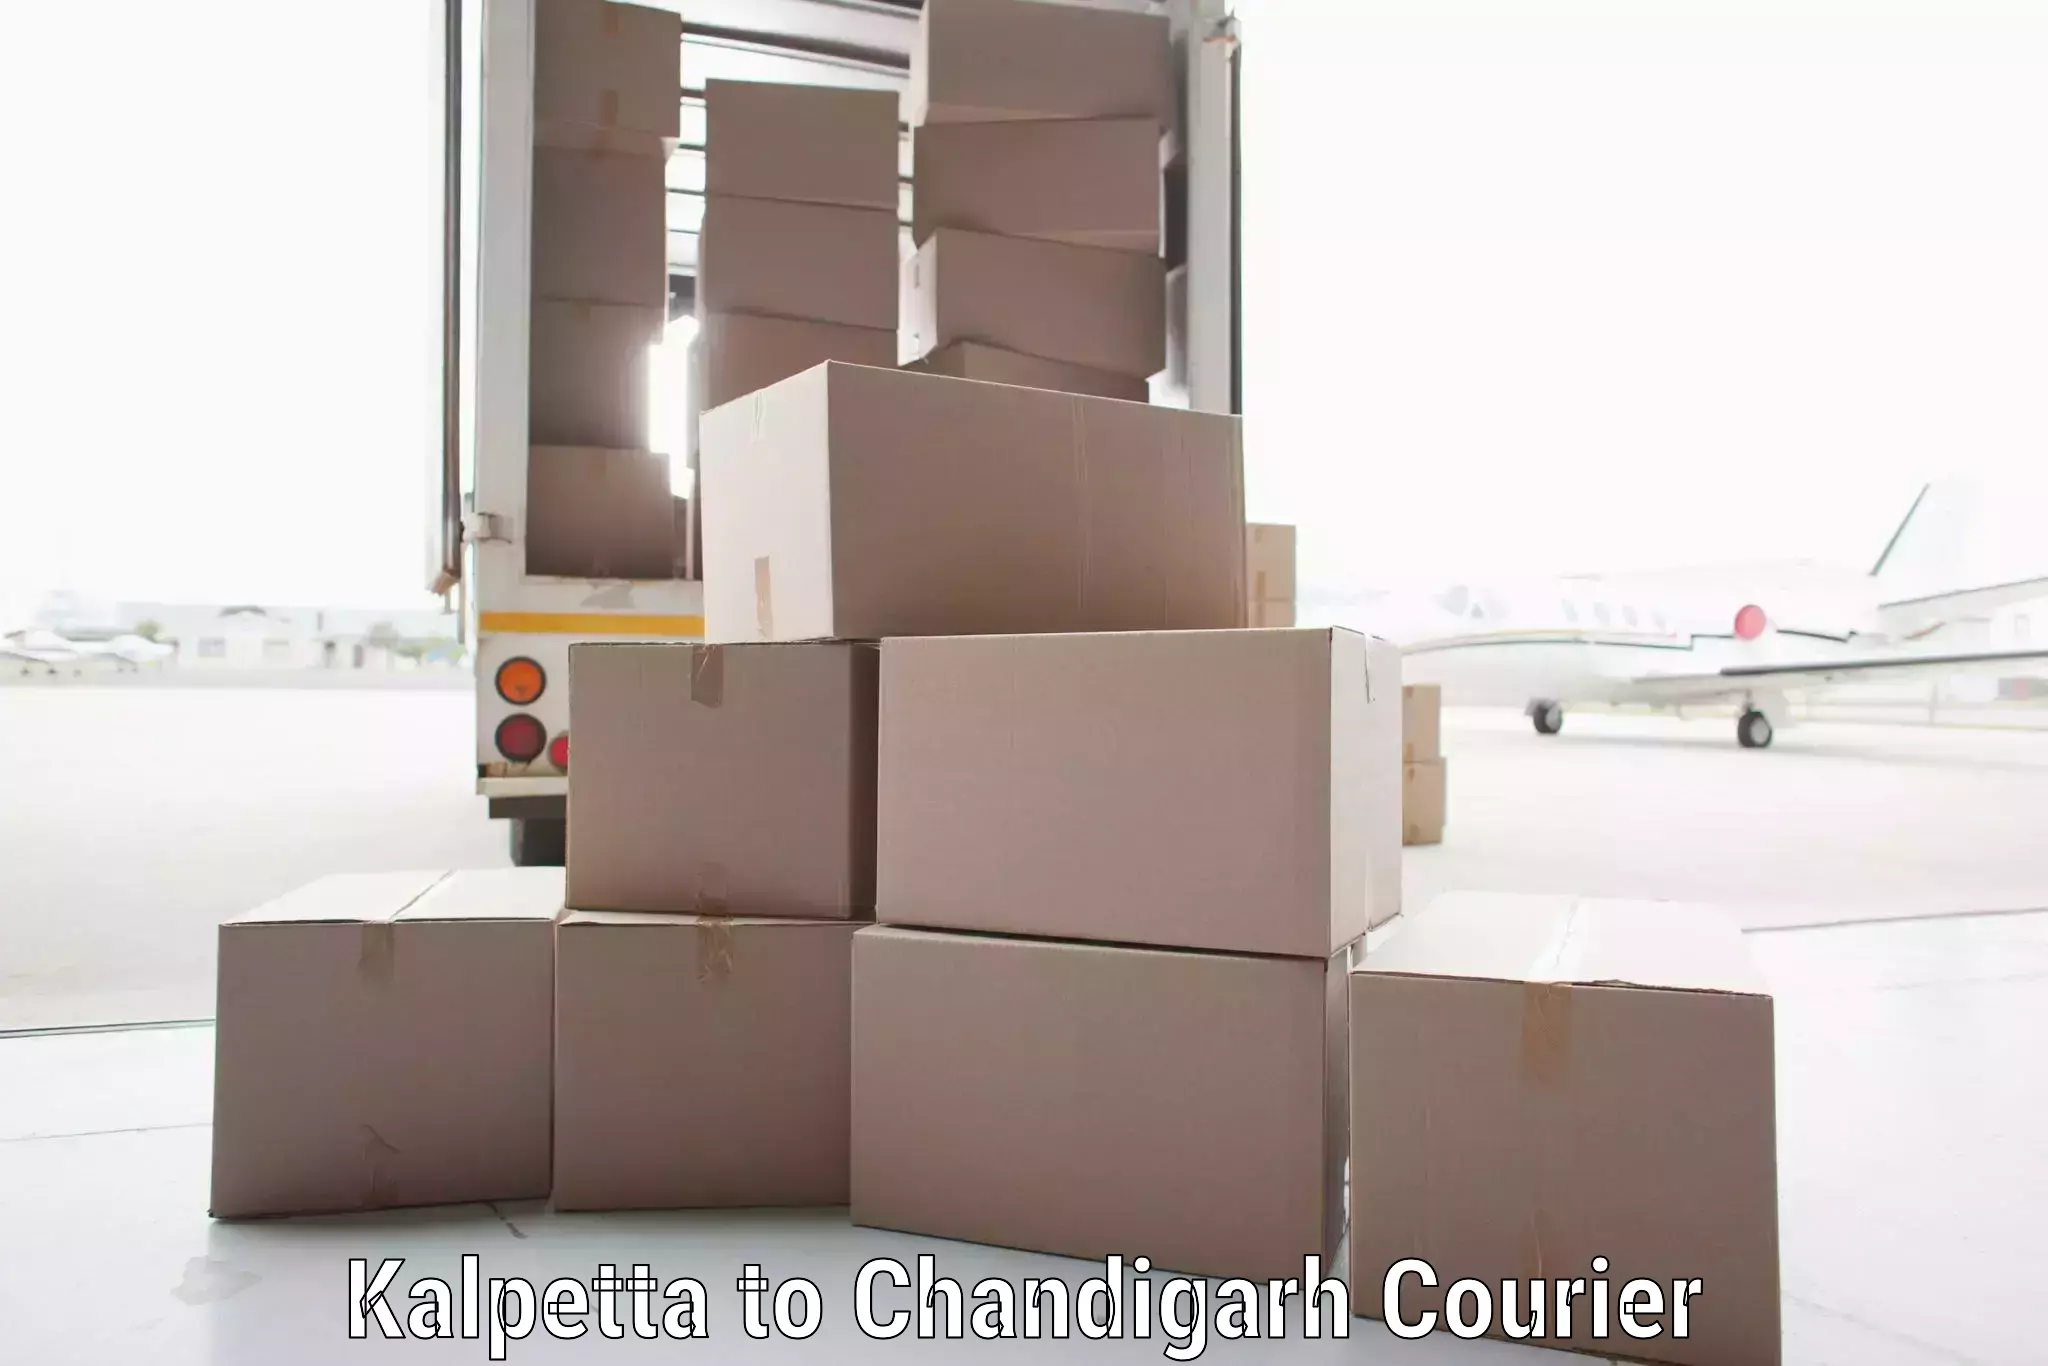 State-of-the-art courier technology Kalpetta to Chandigarh